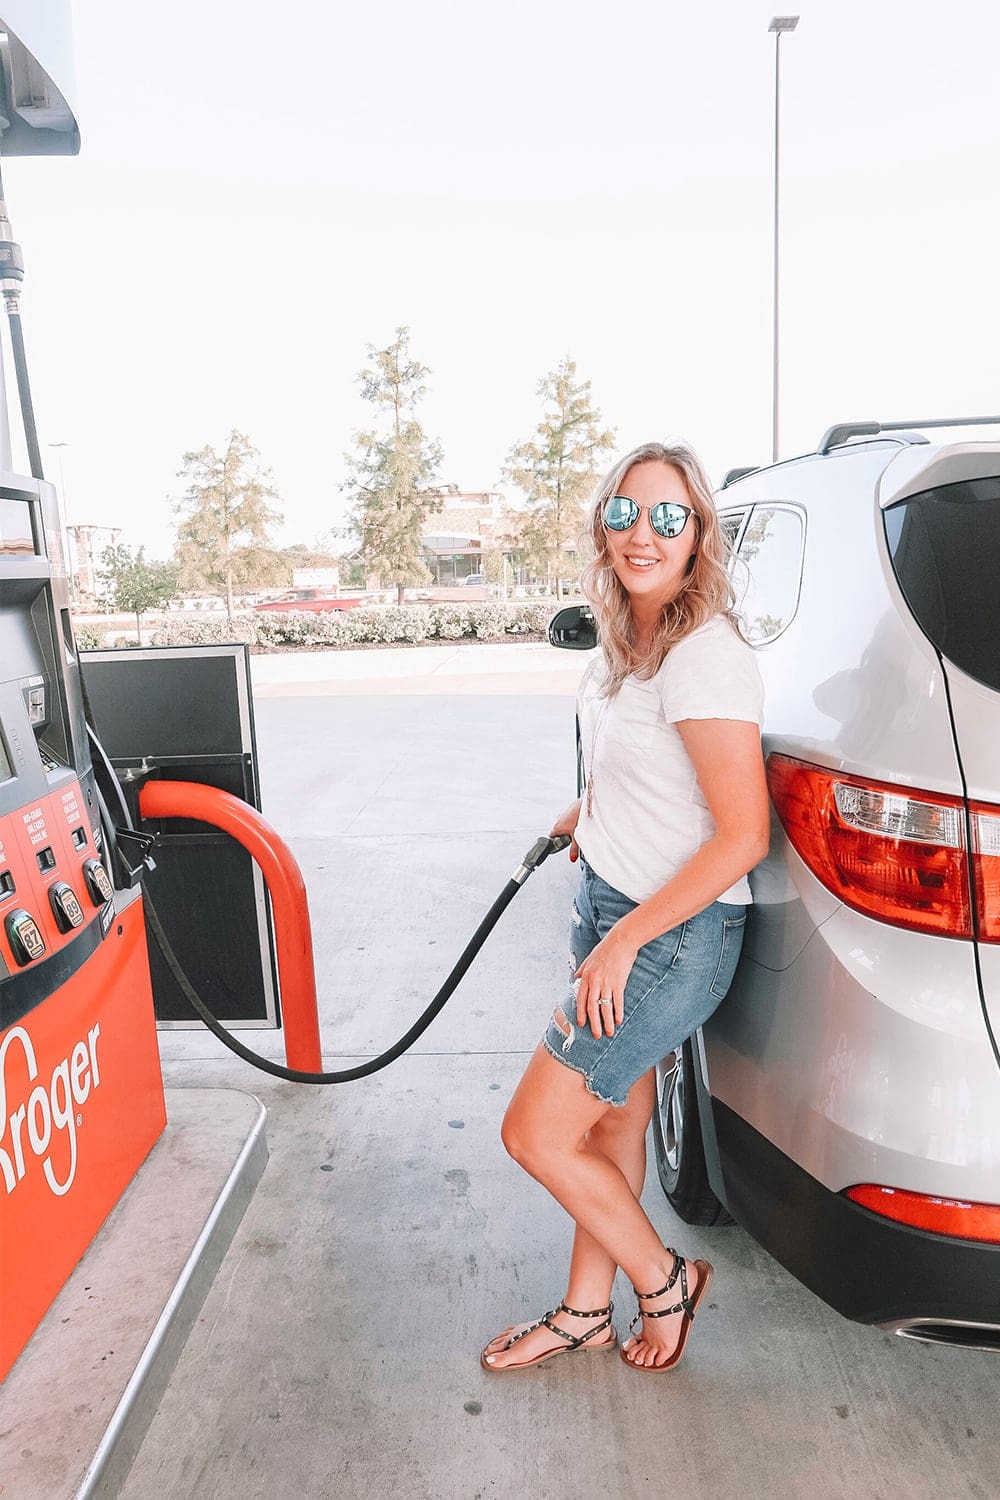 Kroger fuel points are so easy to earn and redeem!